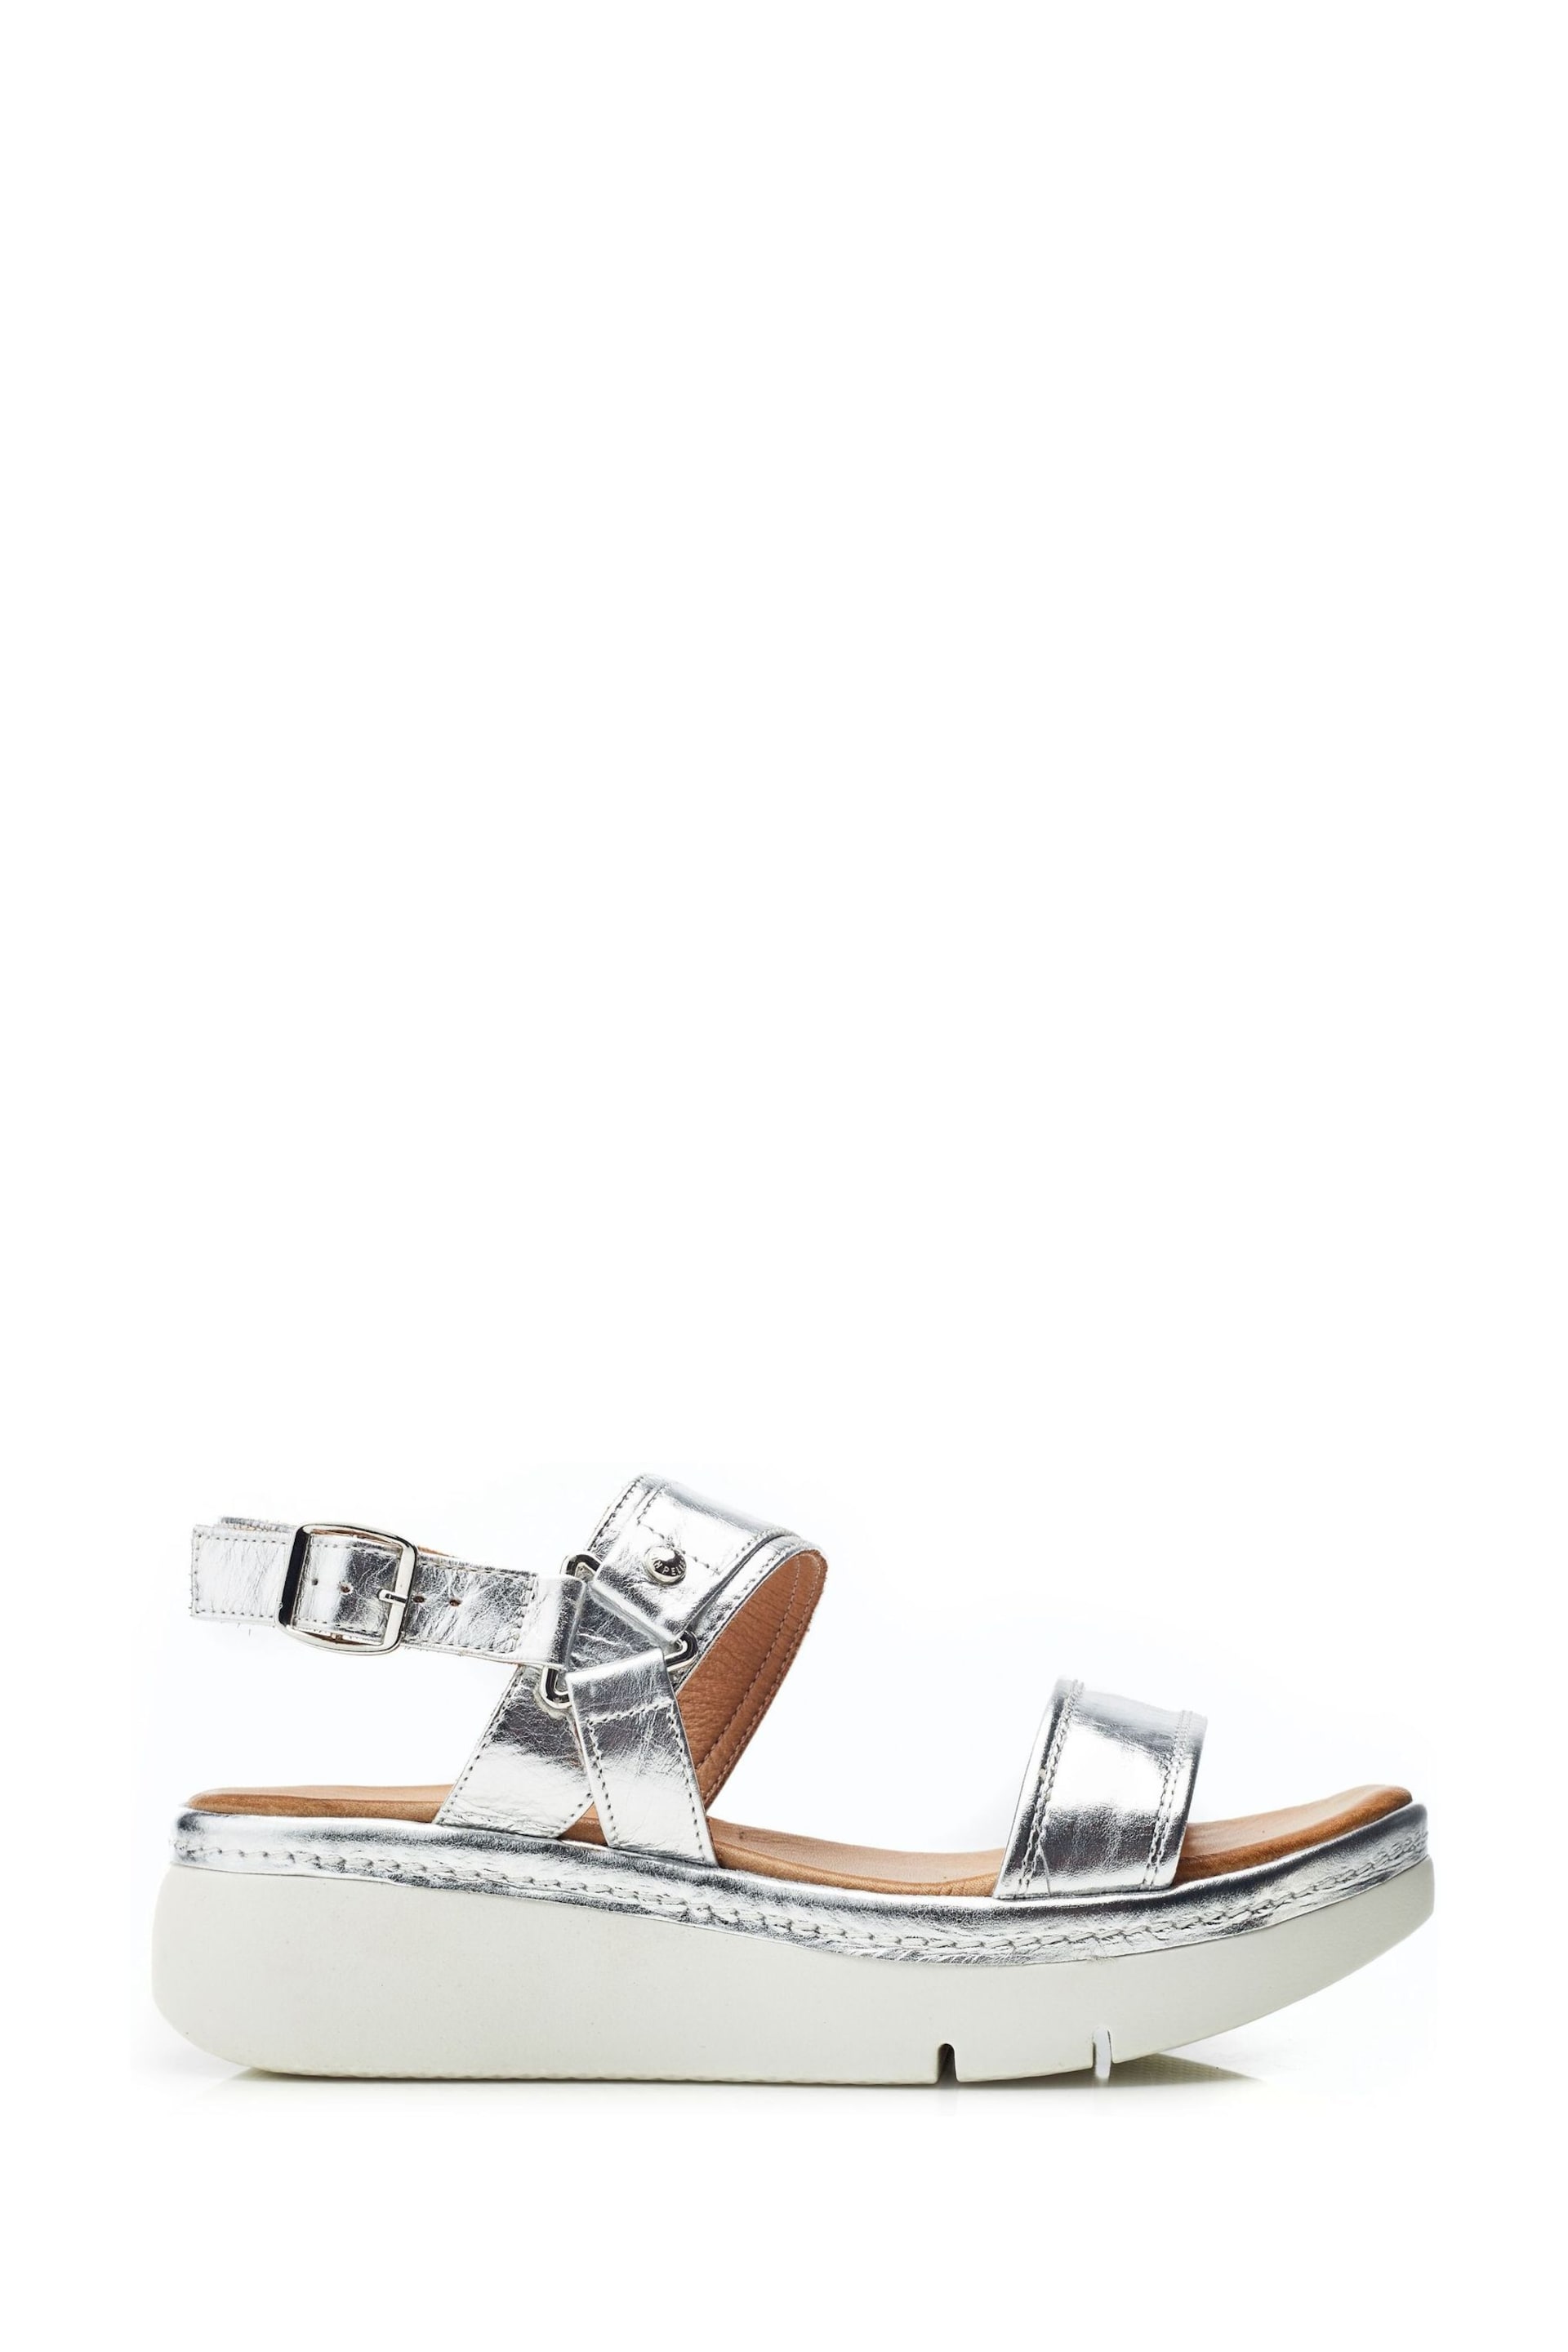 Moda in Pelle Tone Nelly Two Part Flexi Ring Hardware Wedge Sandals - Image 1 of 4